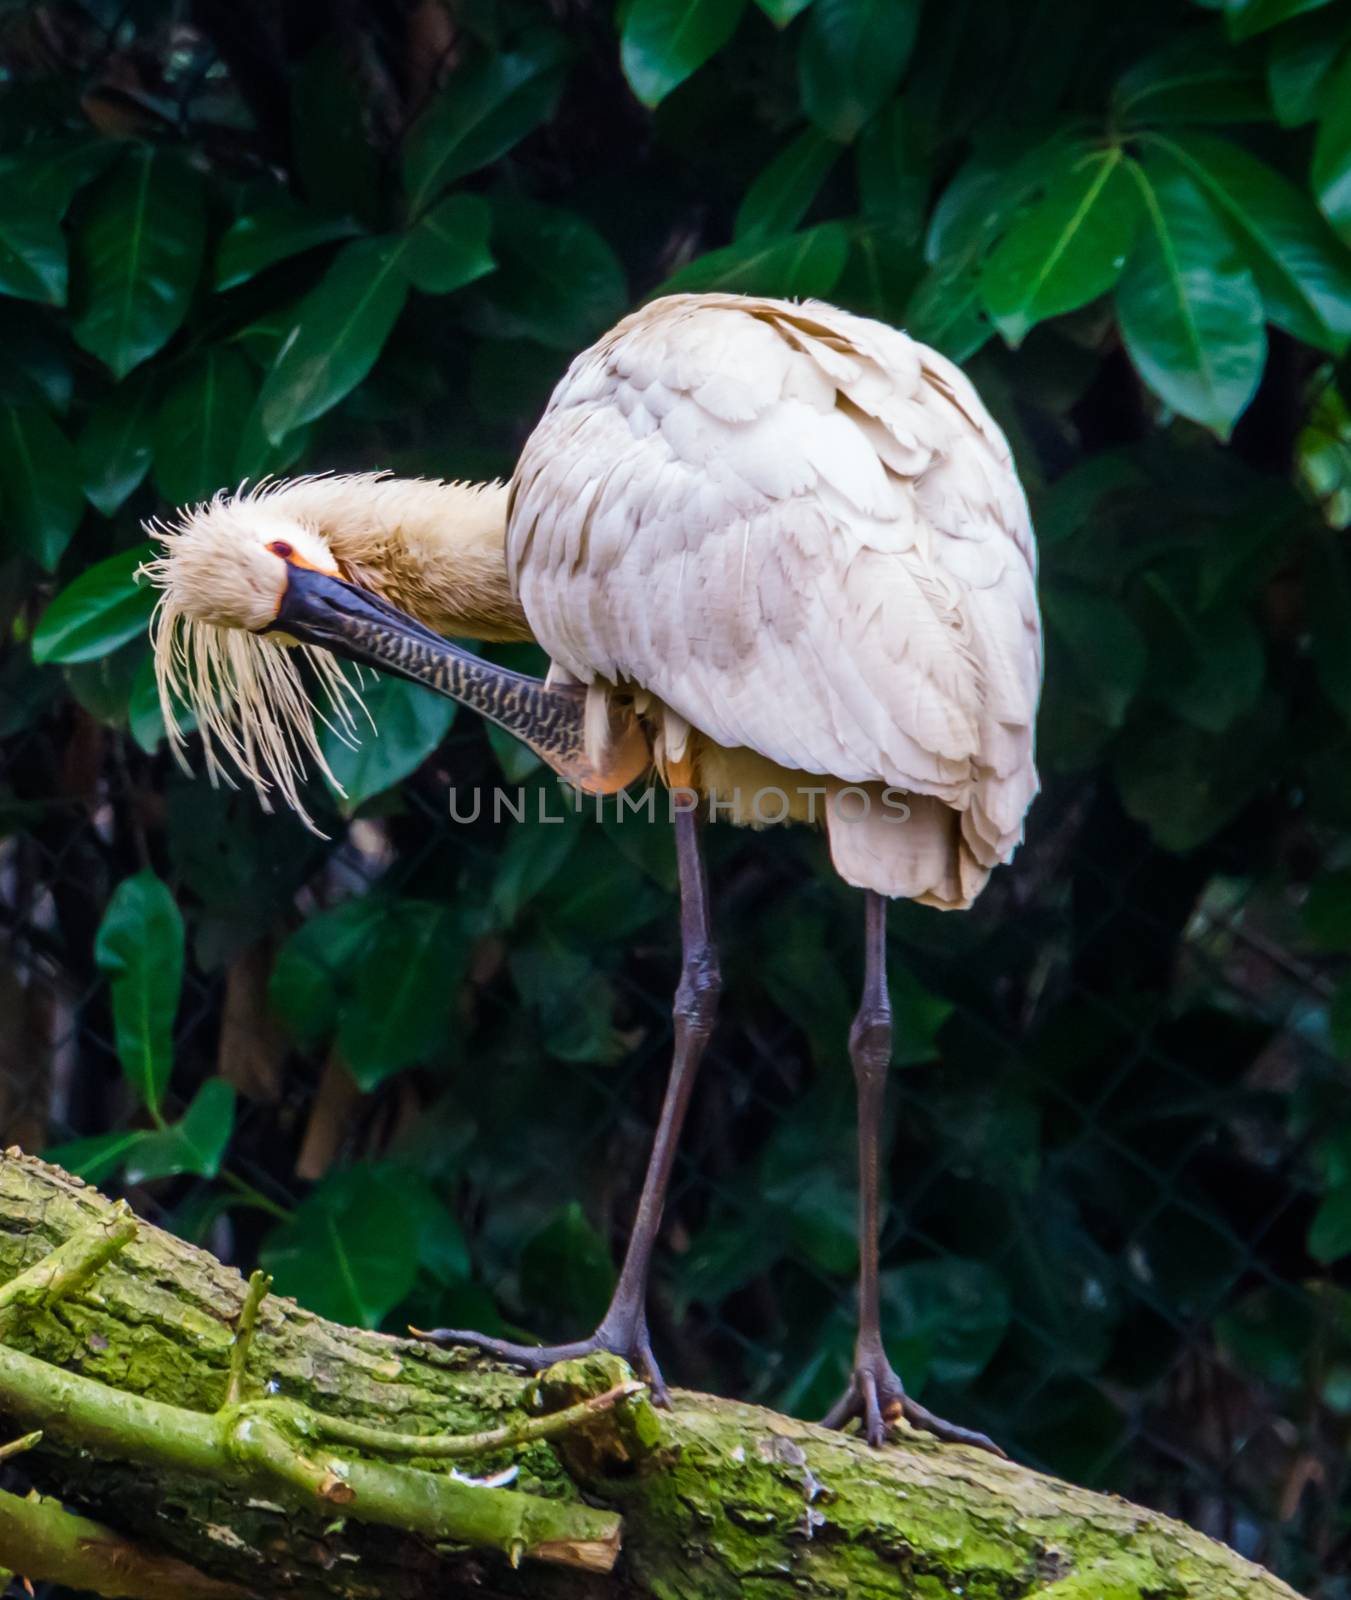 Eurasian spoonbill bird standing on a branch and cleaning its feathers